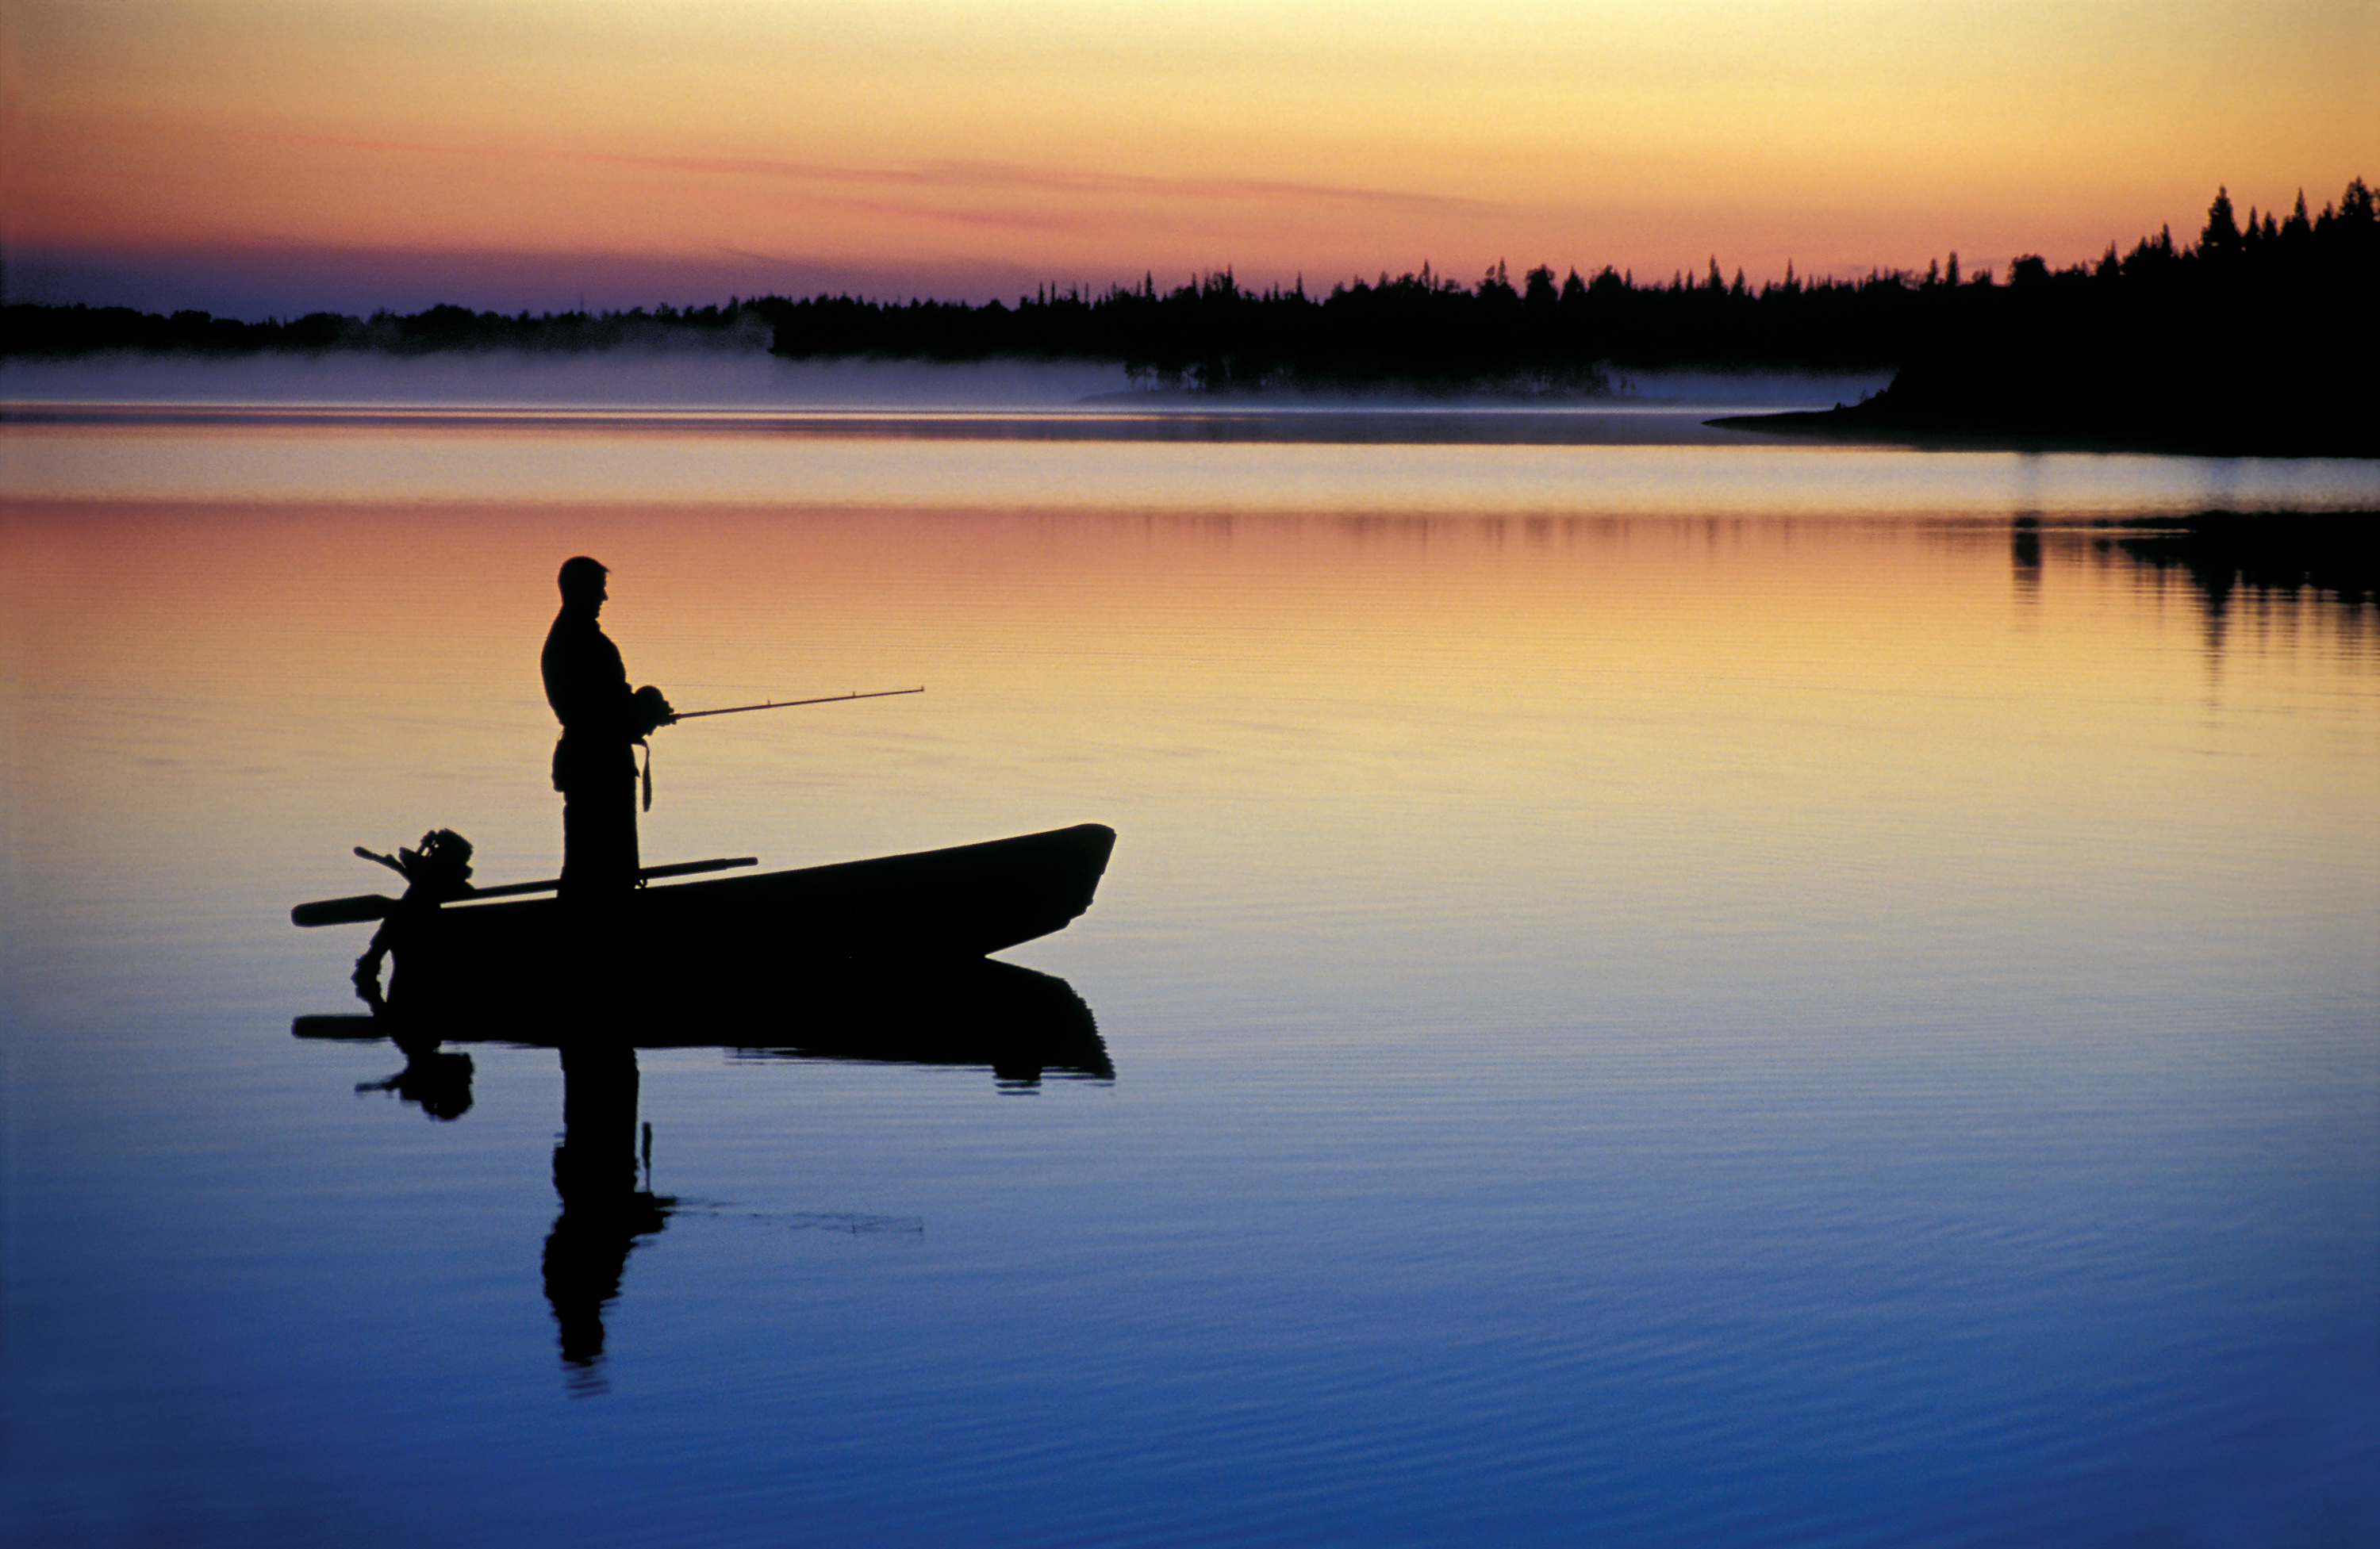 Silhouette of a person fishing from a boat on the water. 